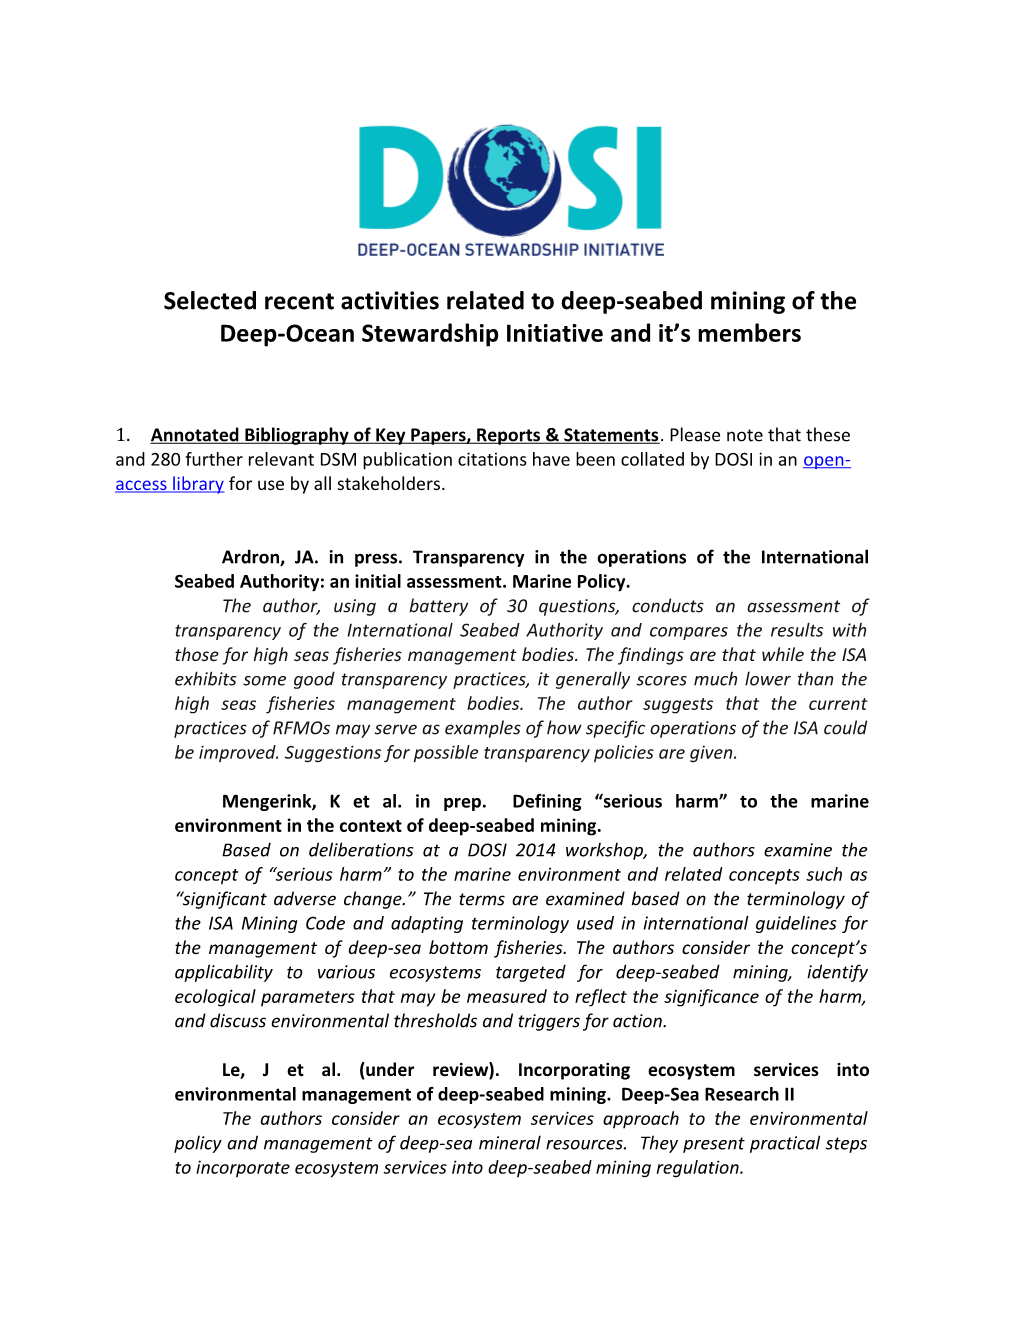 Selected Recent Activities Related to Deep-Seabed Mining of the Deep-Ocean Stewardship